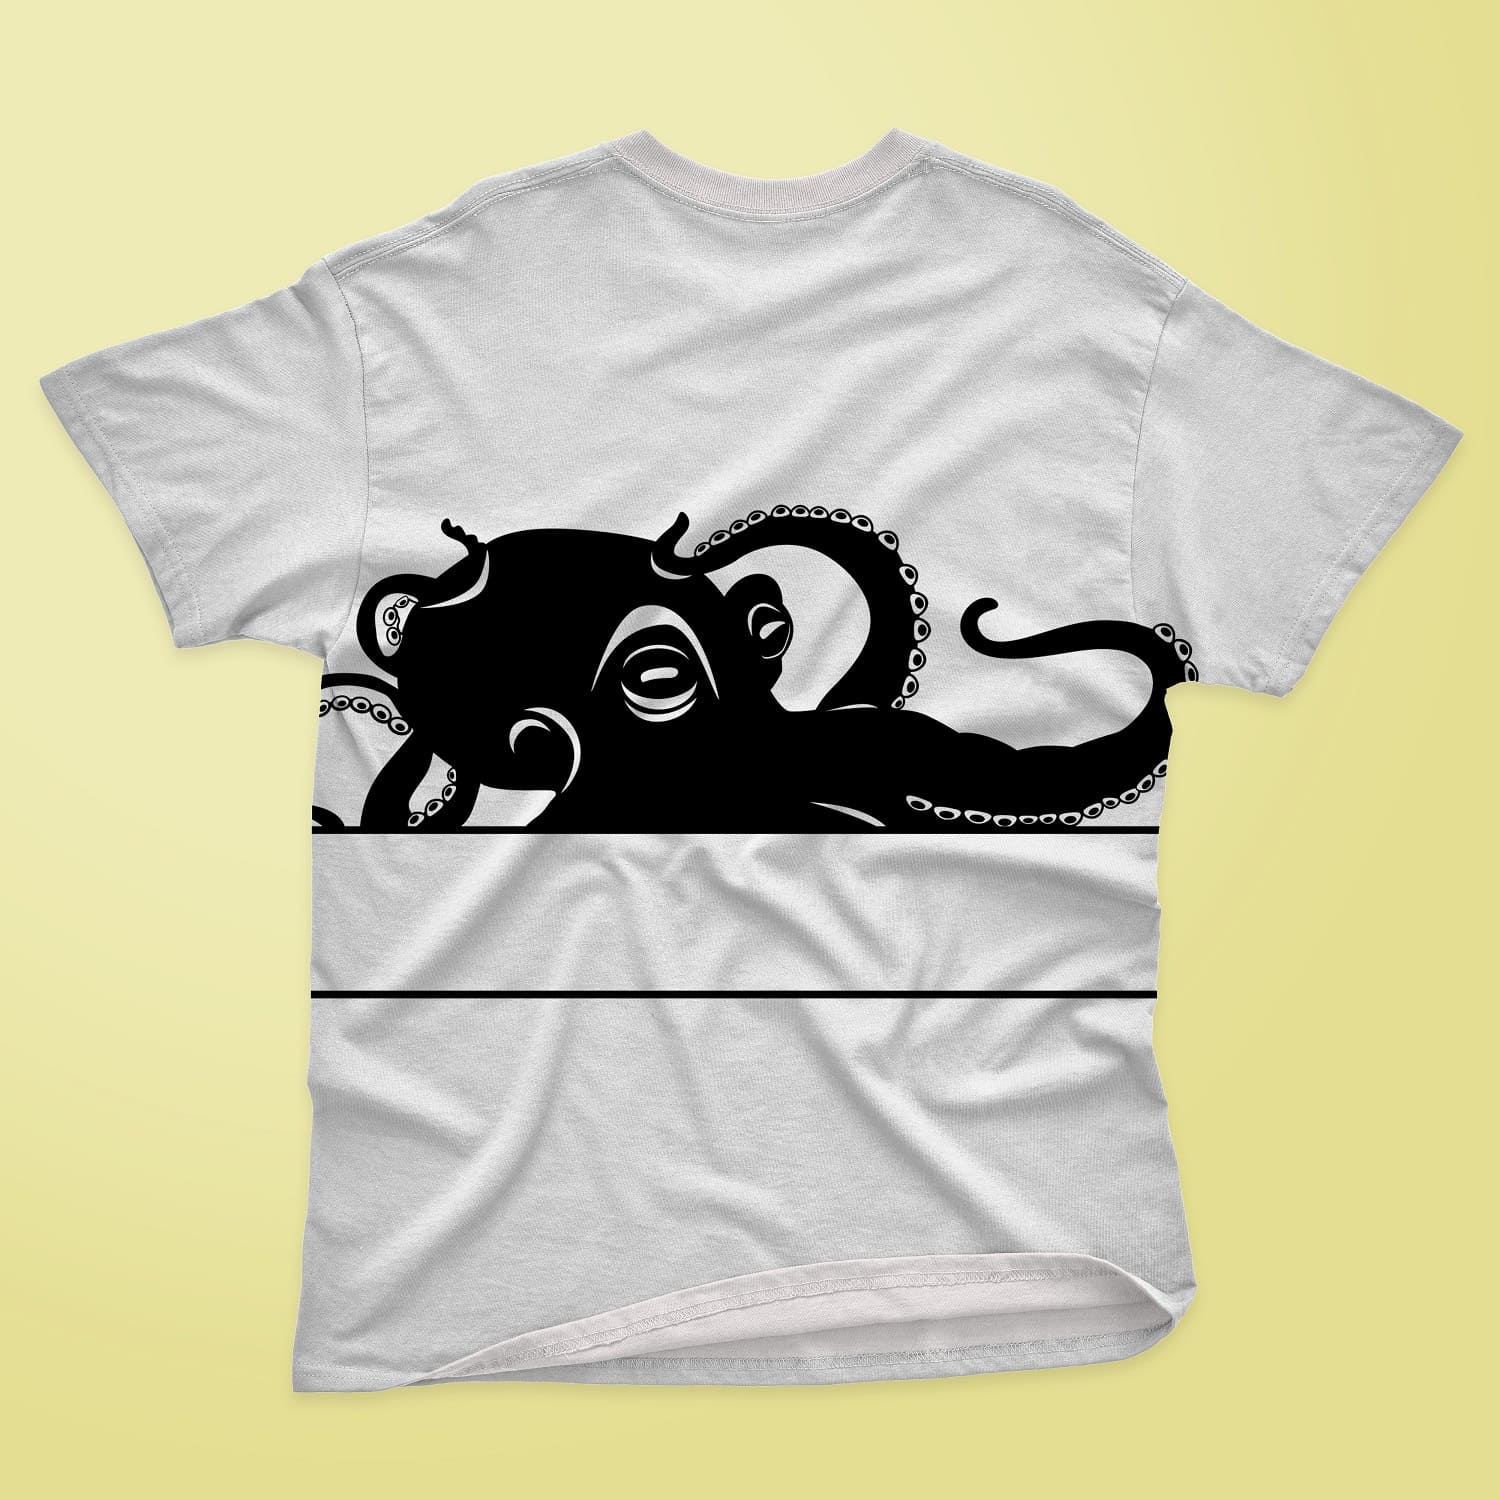 T-shirt with black Monogram Octopus in the middle.